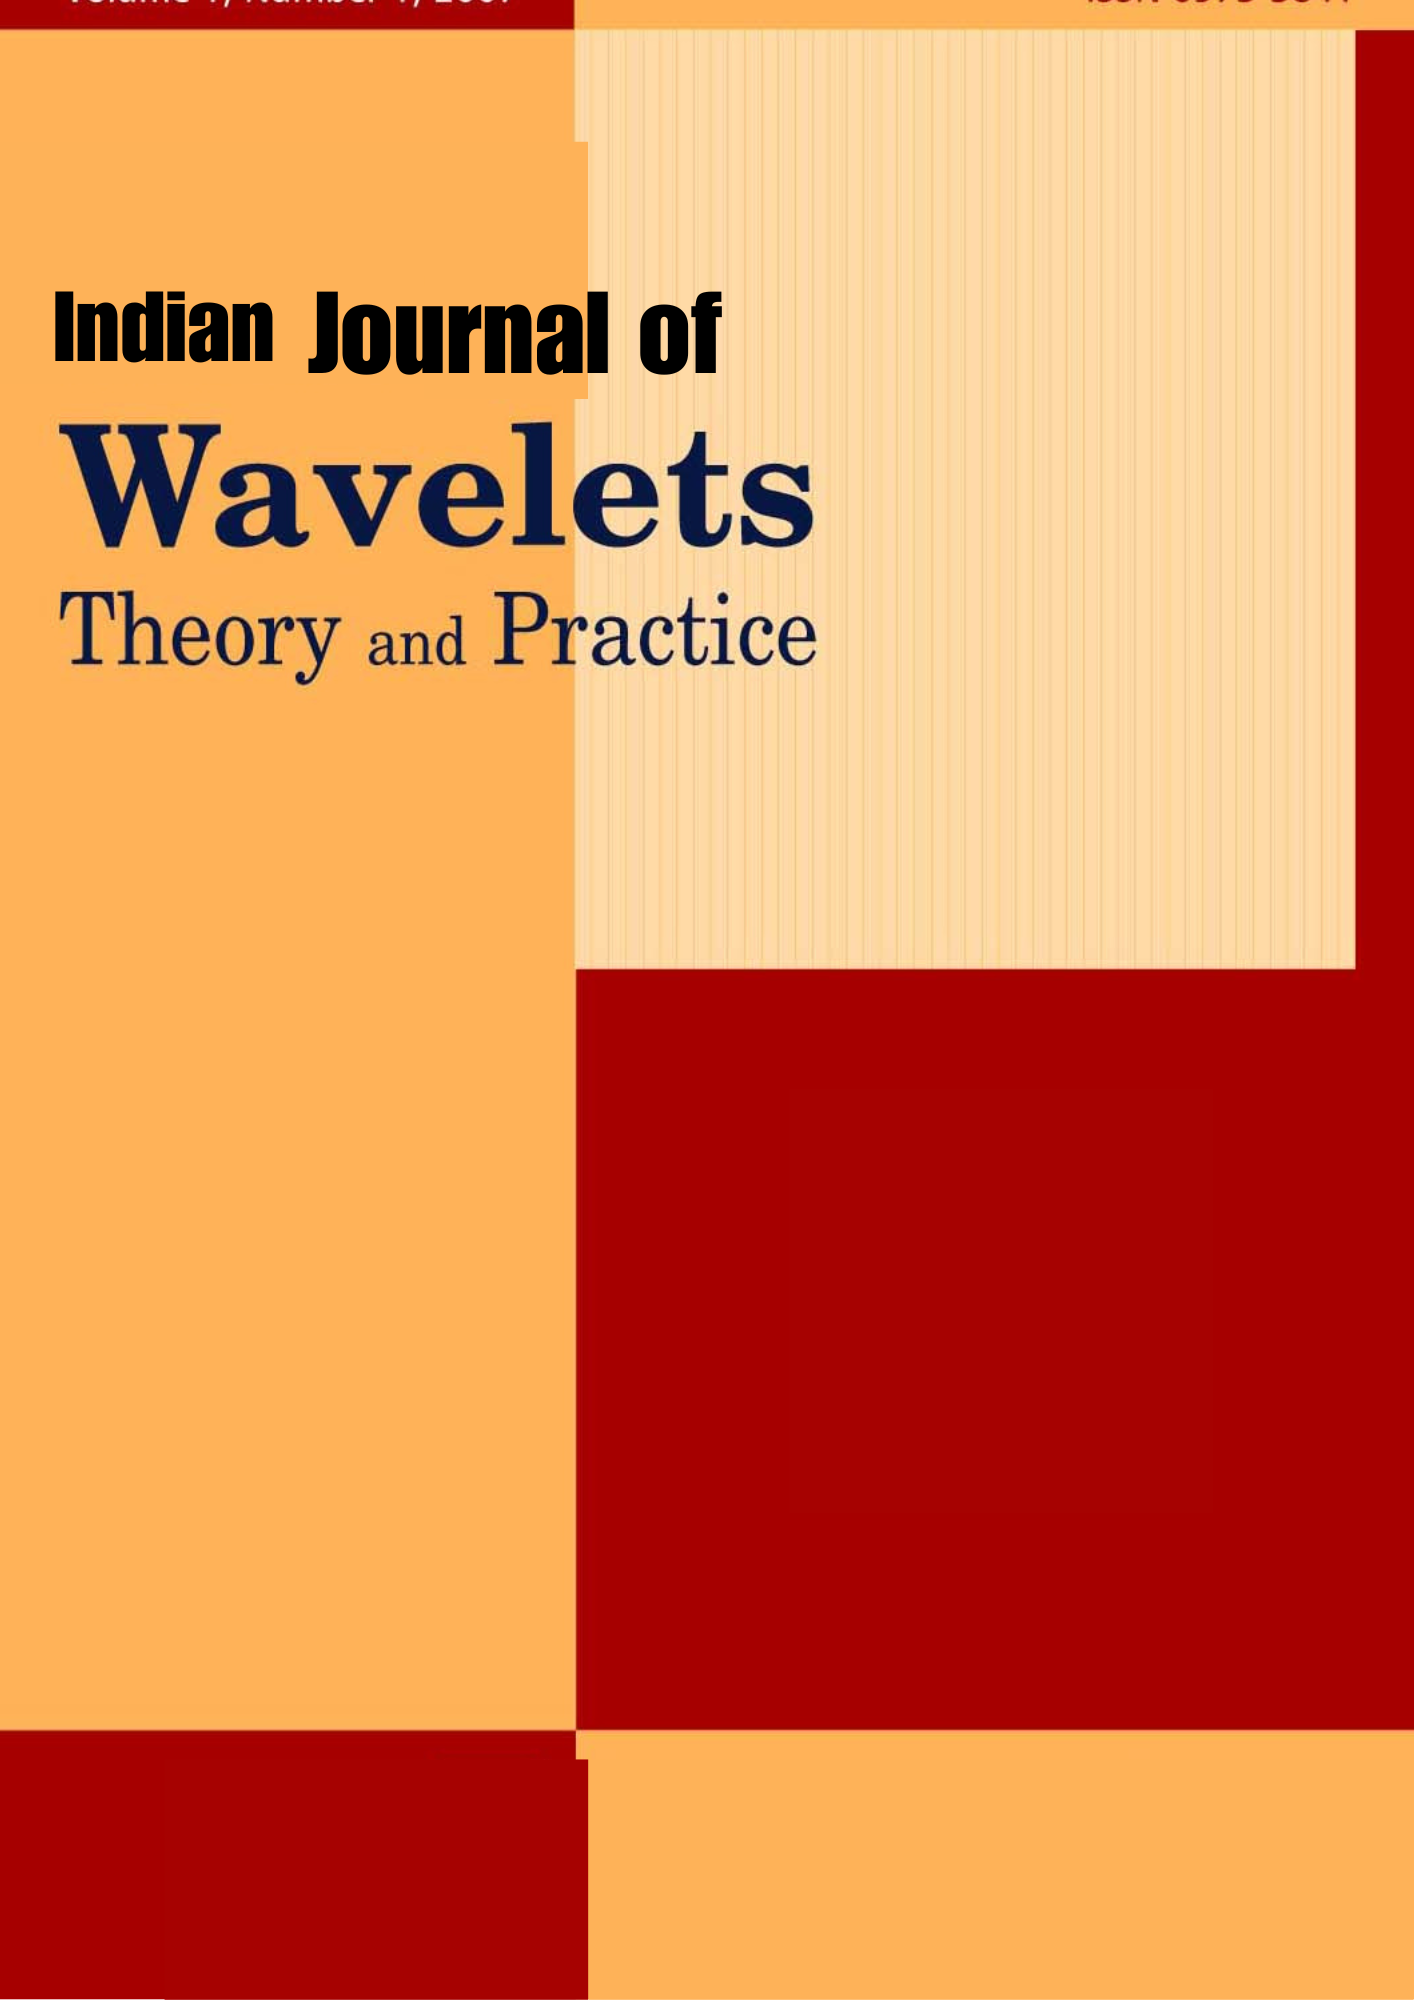 Indian Journal of Wavelet Theory and Practical